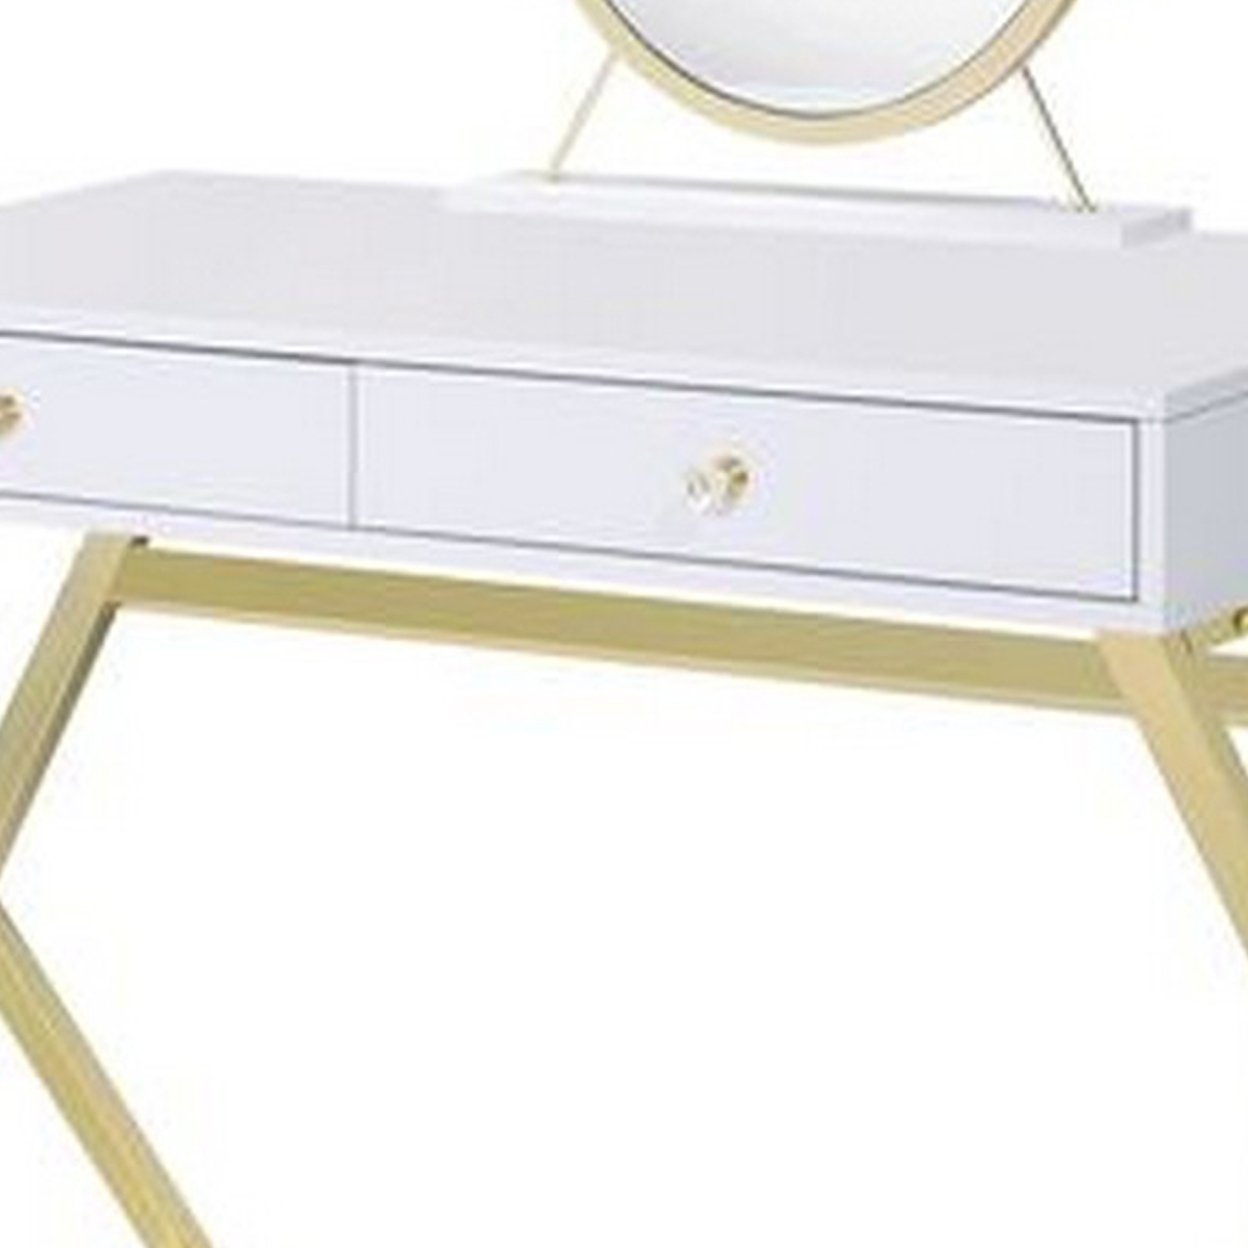 Vanity Desk With Removable Mirror And Cross Metal Legs, White And Gold- Saltoro Sherpi